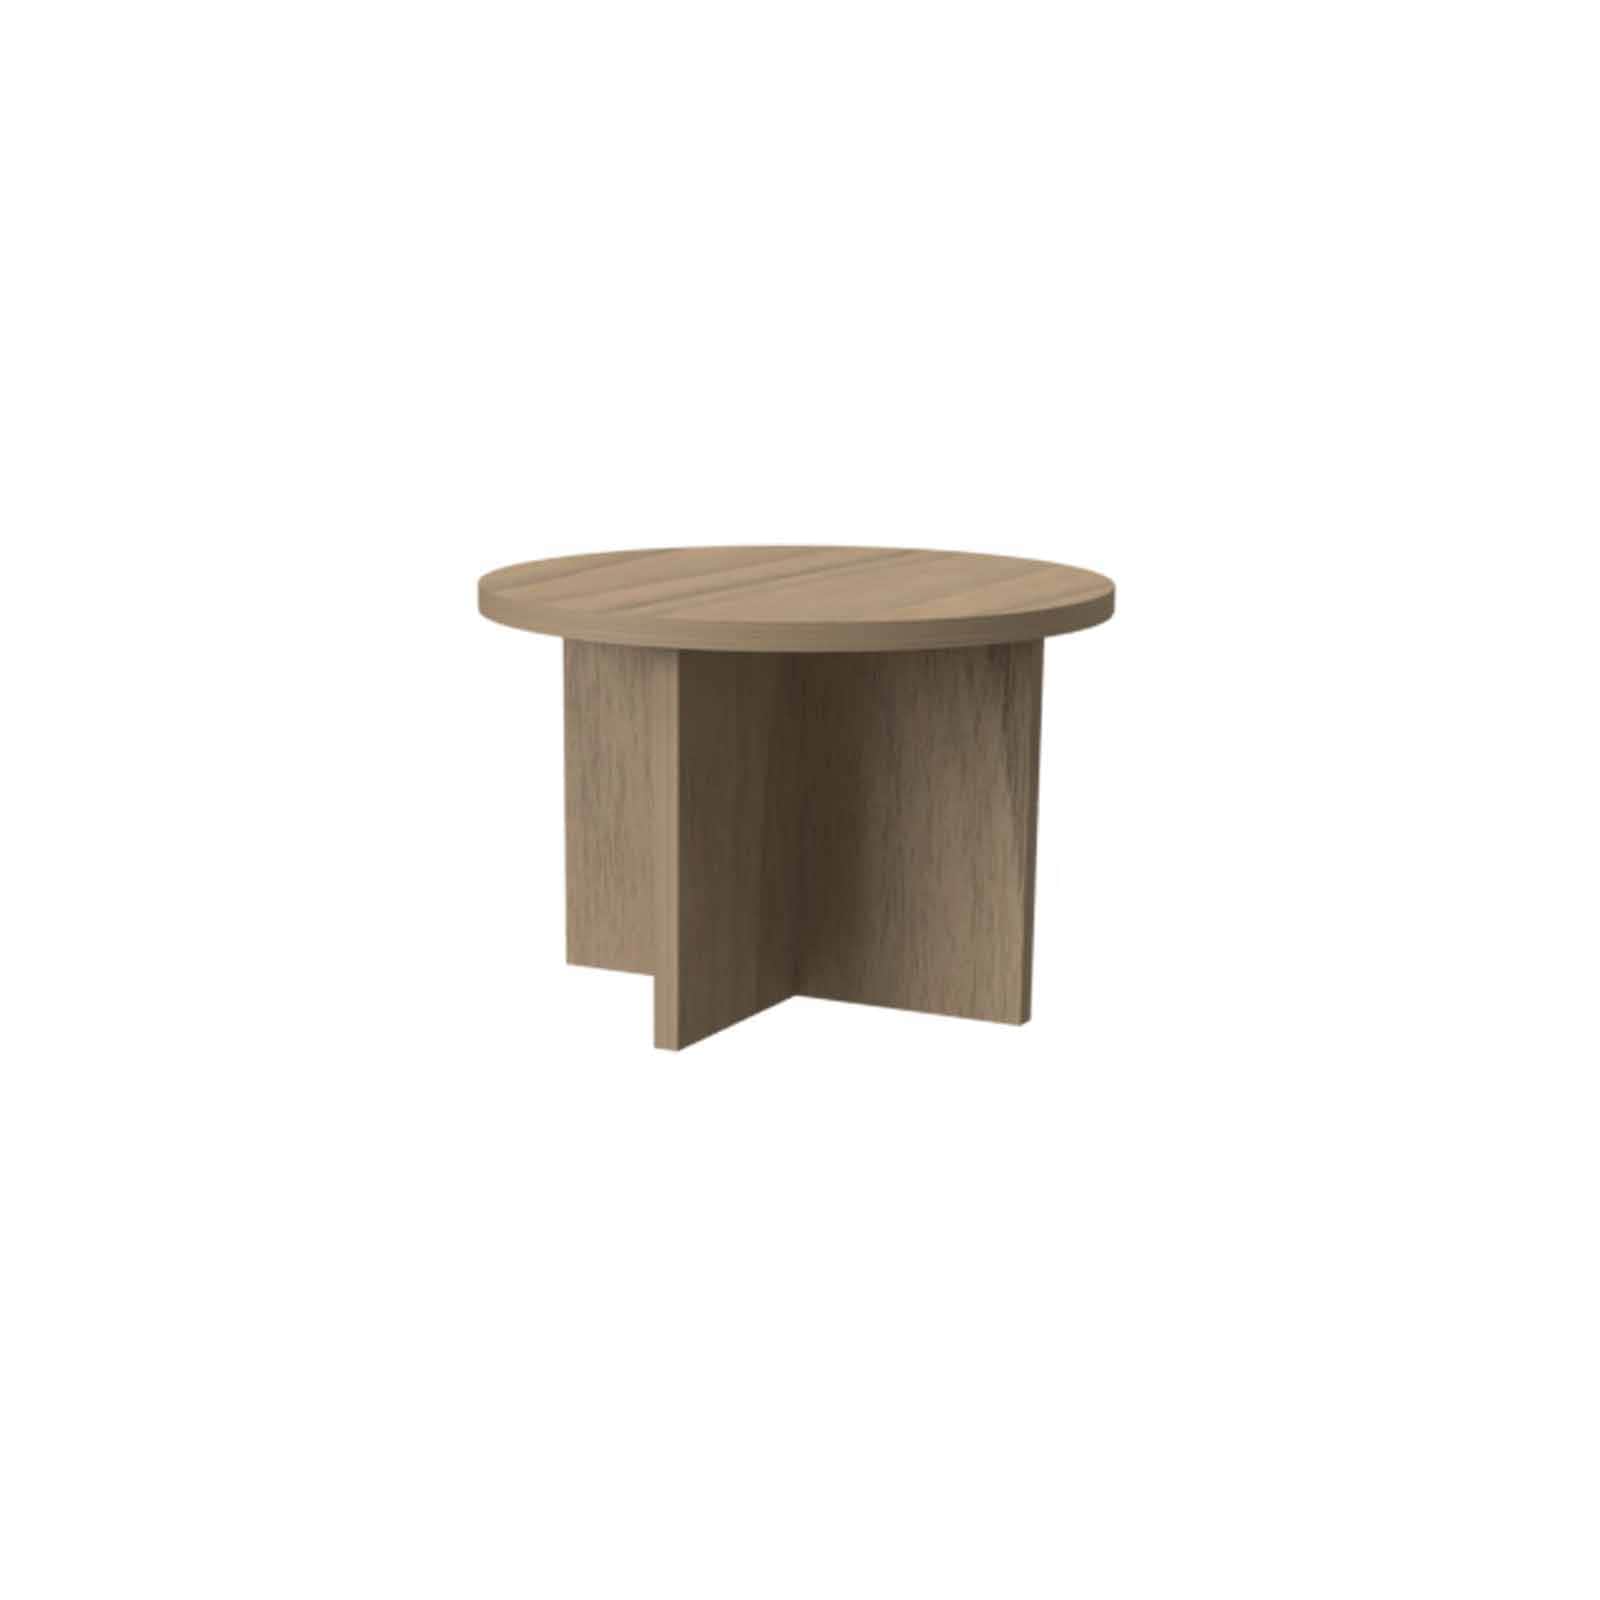 MADE TO ORDER Circular Coffee Table D900mm x H400mm